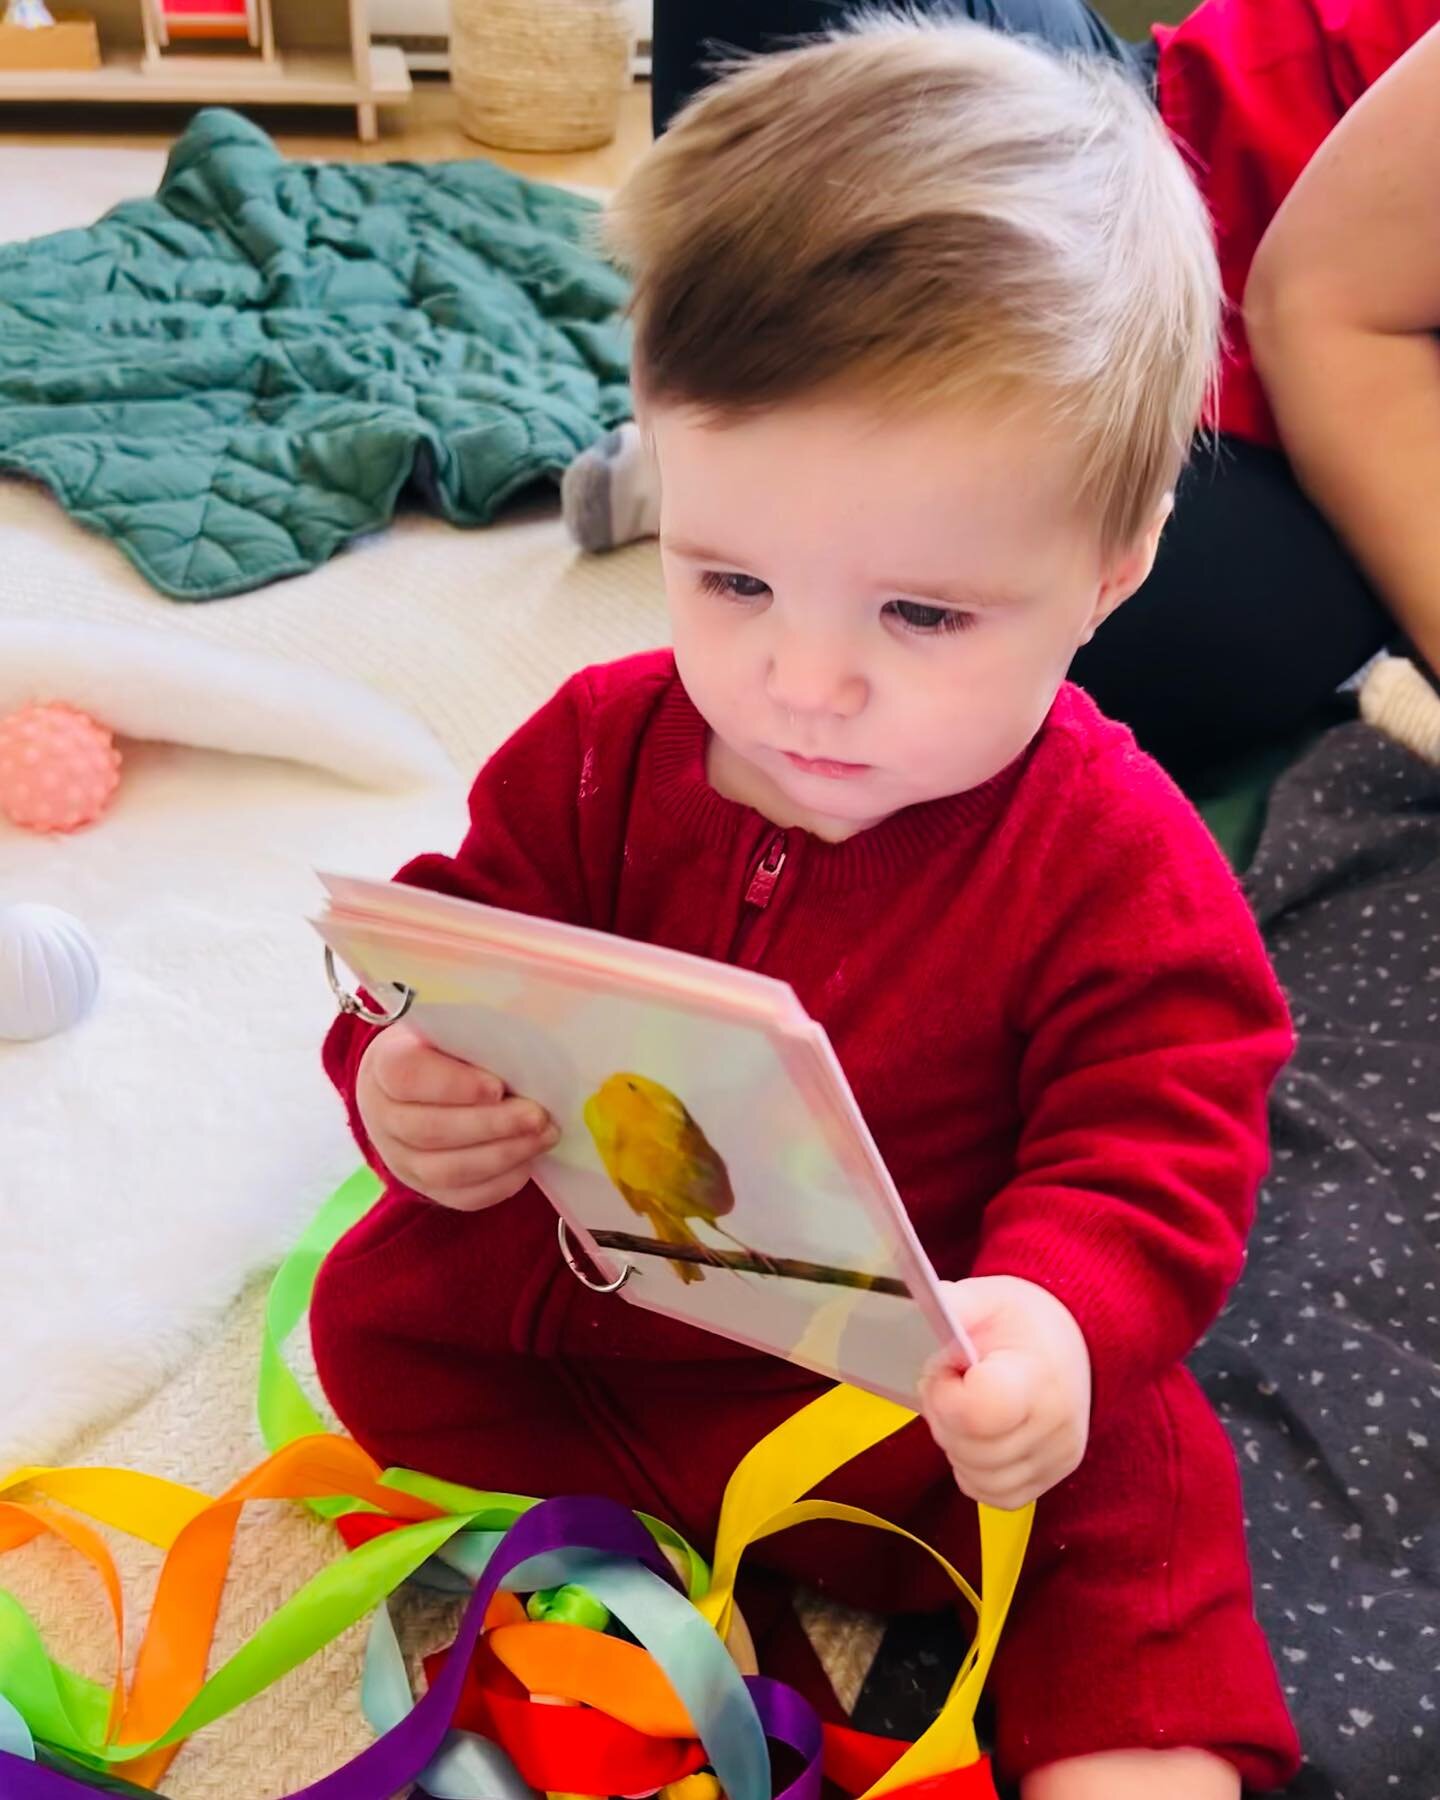 🌱LEARN TO PLAY THE MONTESSORI WAY🌱

Have you been interested in the Montessori philosophy, but are not 100% certain what it&rsquo;s all about?

If so, check out this adorable program for you and baby🤍

The Montessori approach supports a child&rsqu